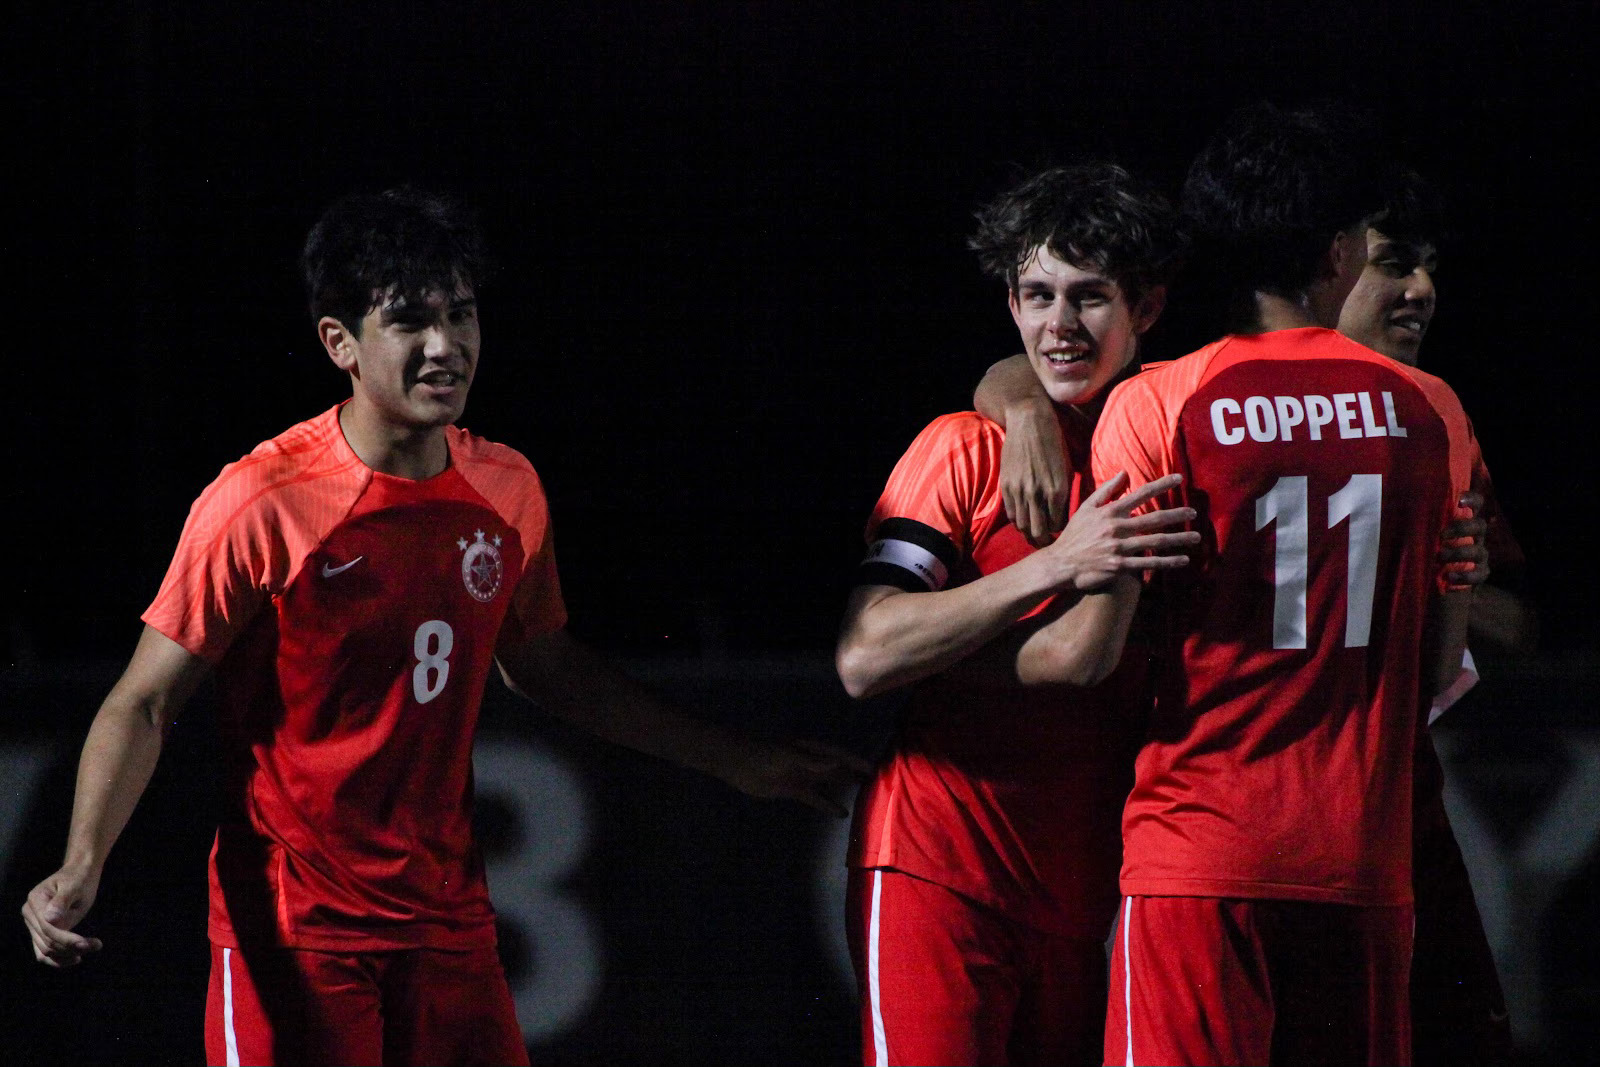 Late Goal by Samuel Stone Secures 1-0 Victory and Ties Coppell with Hebron for Second Place